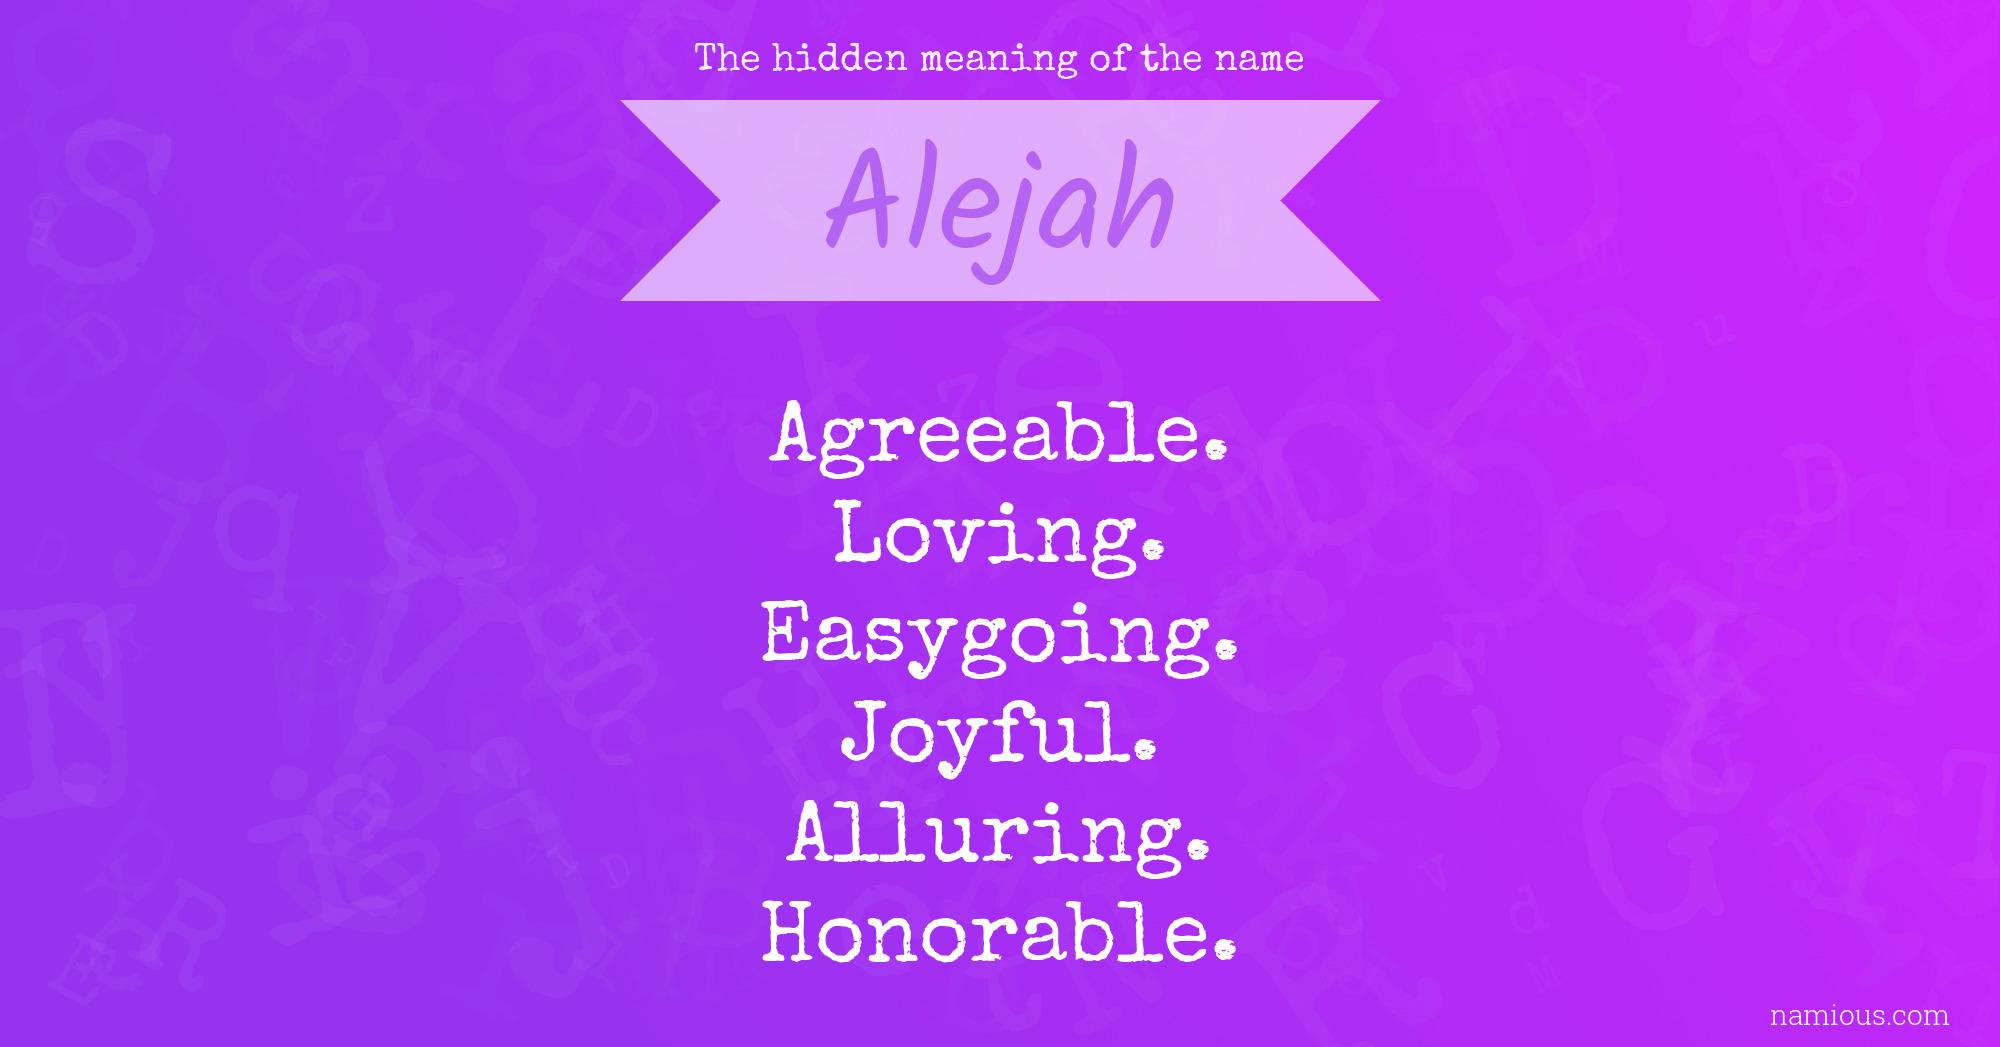 The hidden meaning of the name Alejah